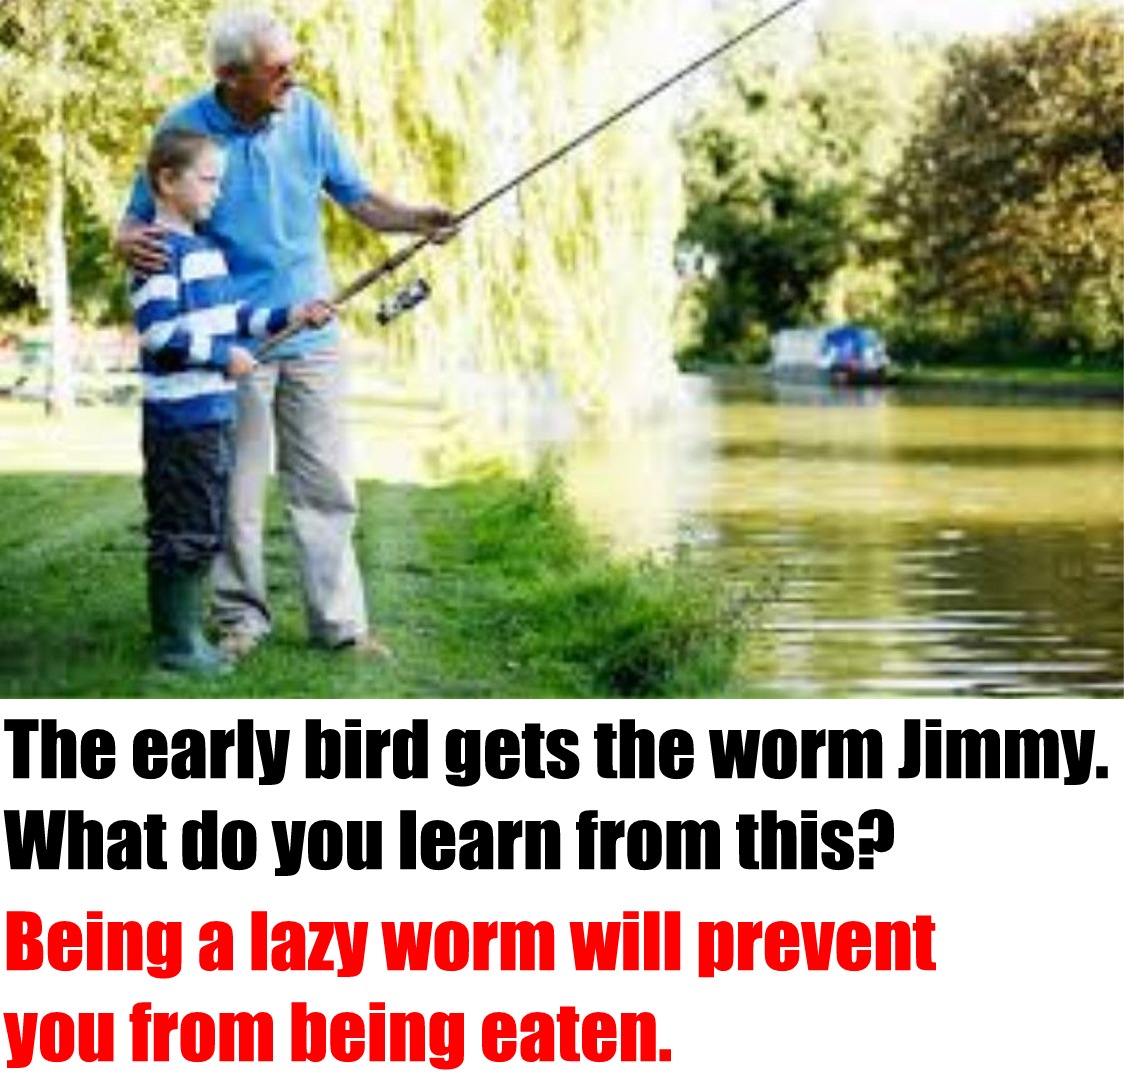 speaking cards family - The early bird gets the worm Jimmy. What do you learn from this? Being a lazy worm will prevent you from being eaten.